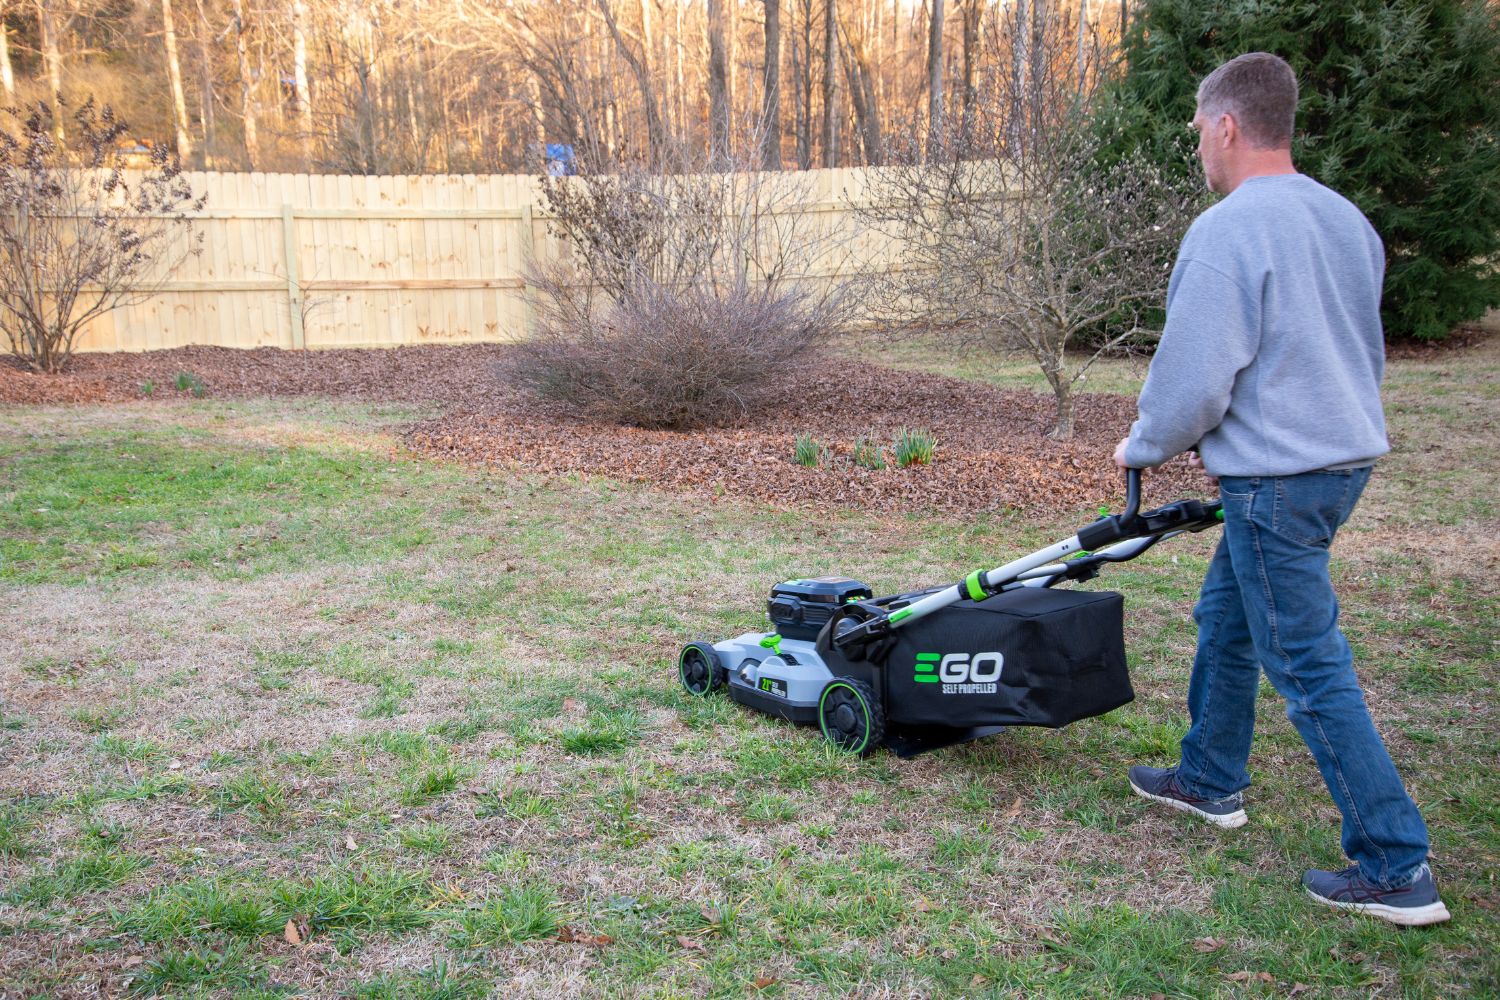 Take up to 40% Off With Cyber Monday Lawn Mower Deals